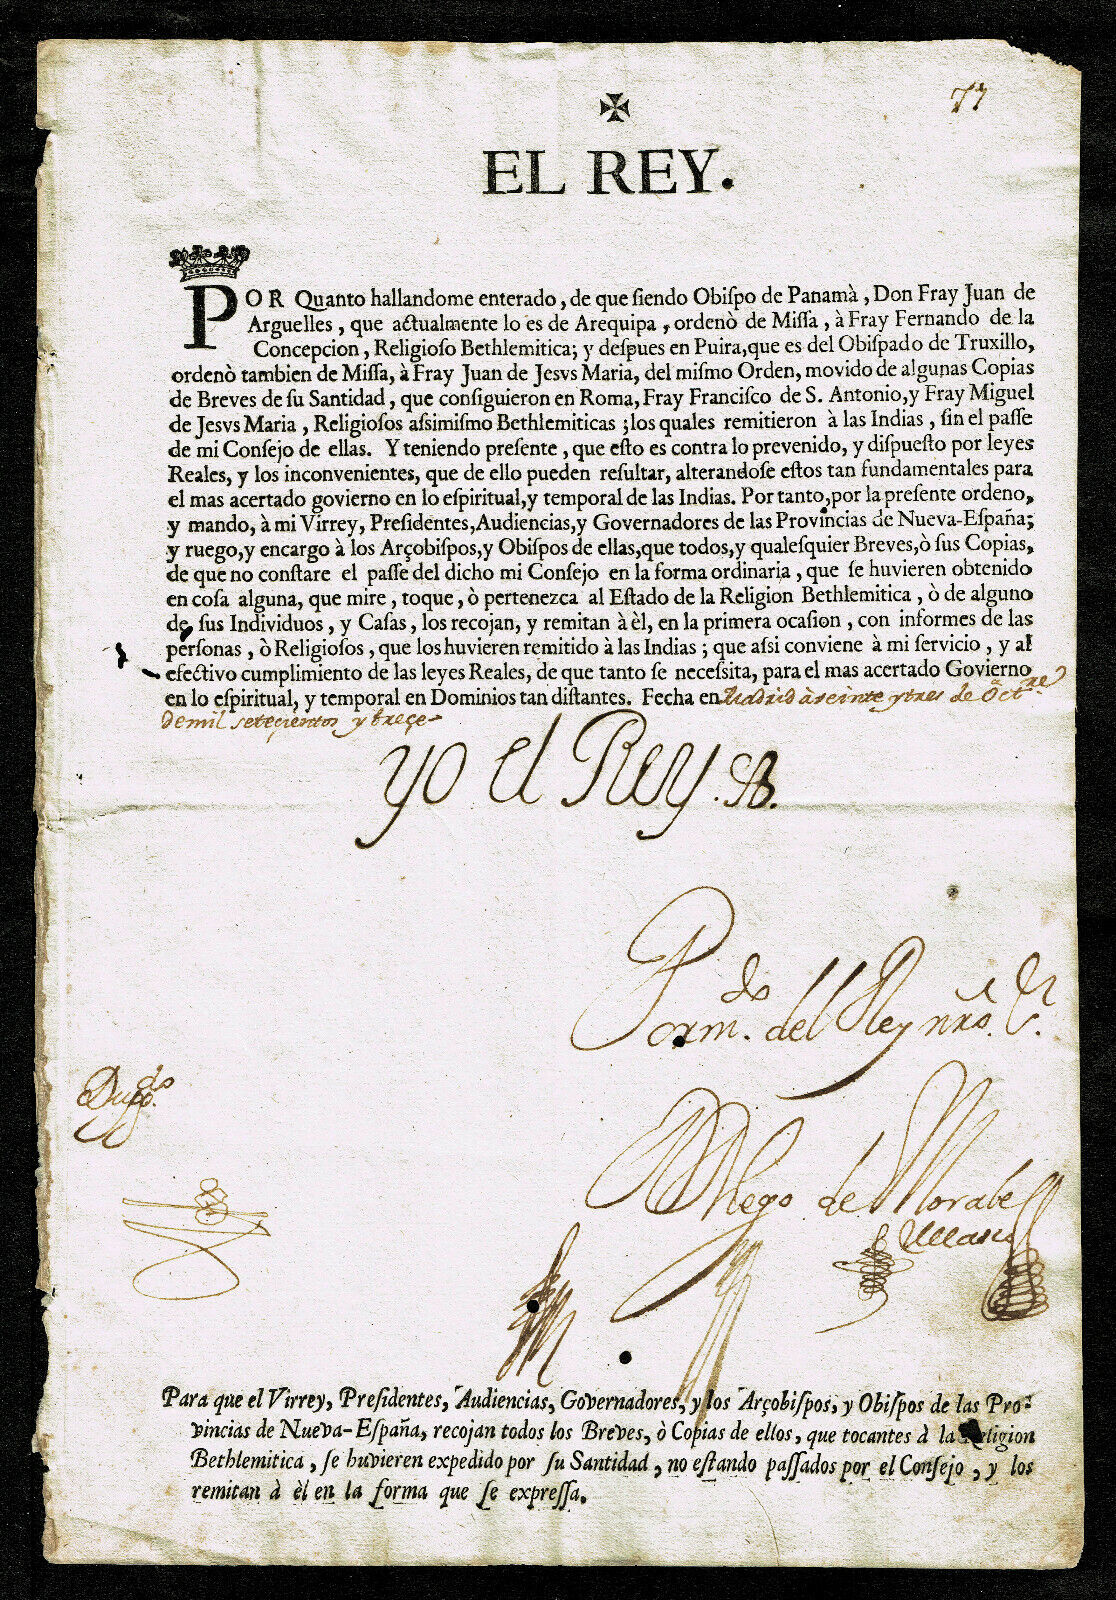 SPAIN 🇪🇸KING FELIPE V HISTORICAL APPOINTMENT AND AUTOGRAPH IN 1713🇪🇸